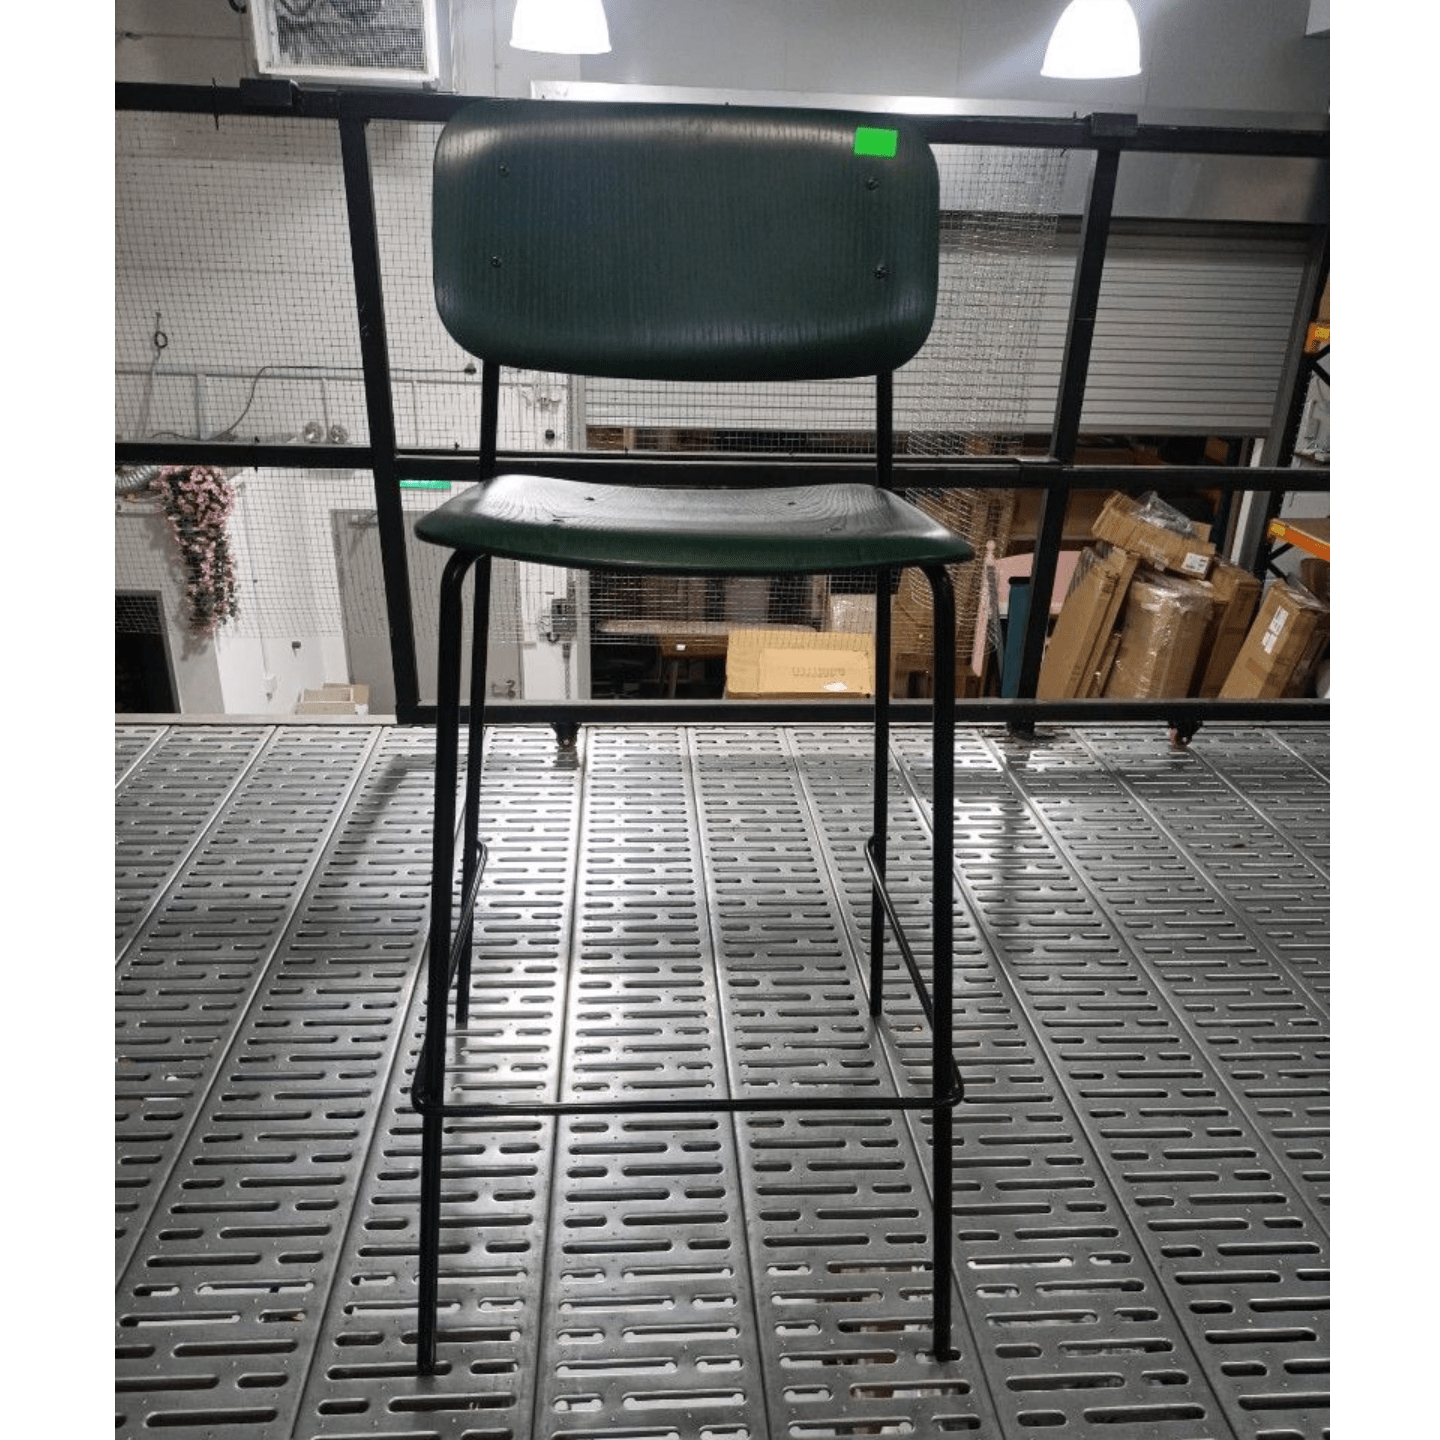 WRAITH Bar Stool in GREEN - one only